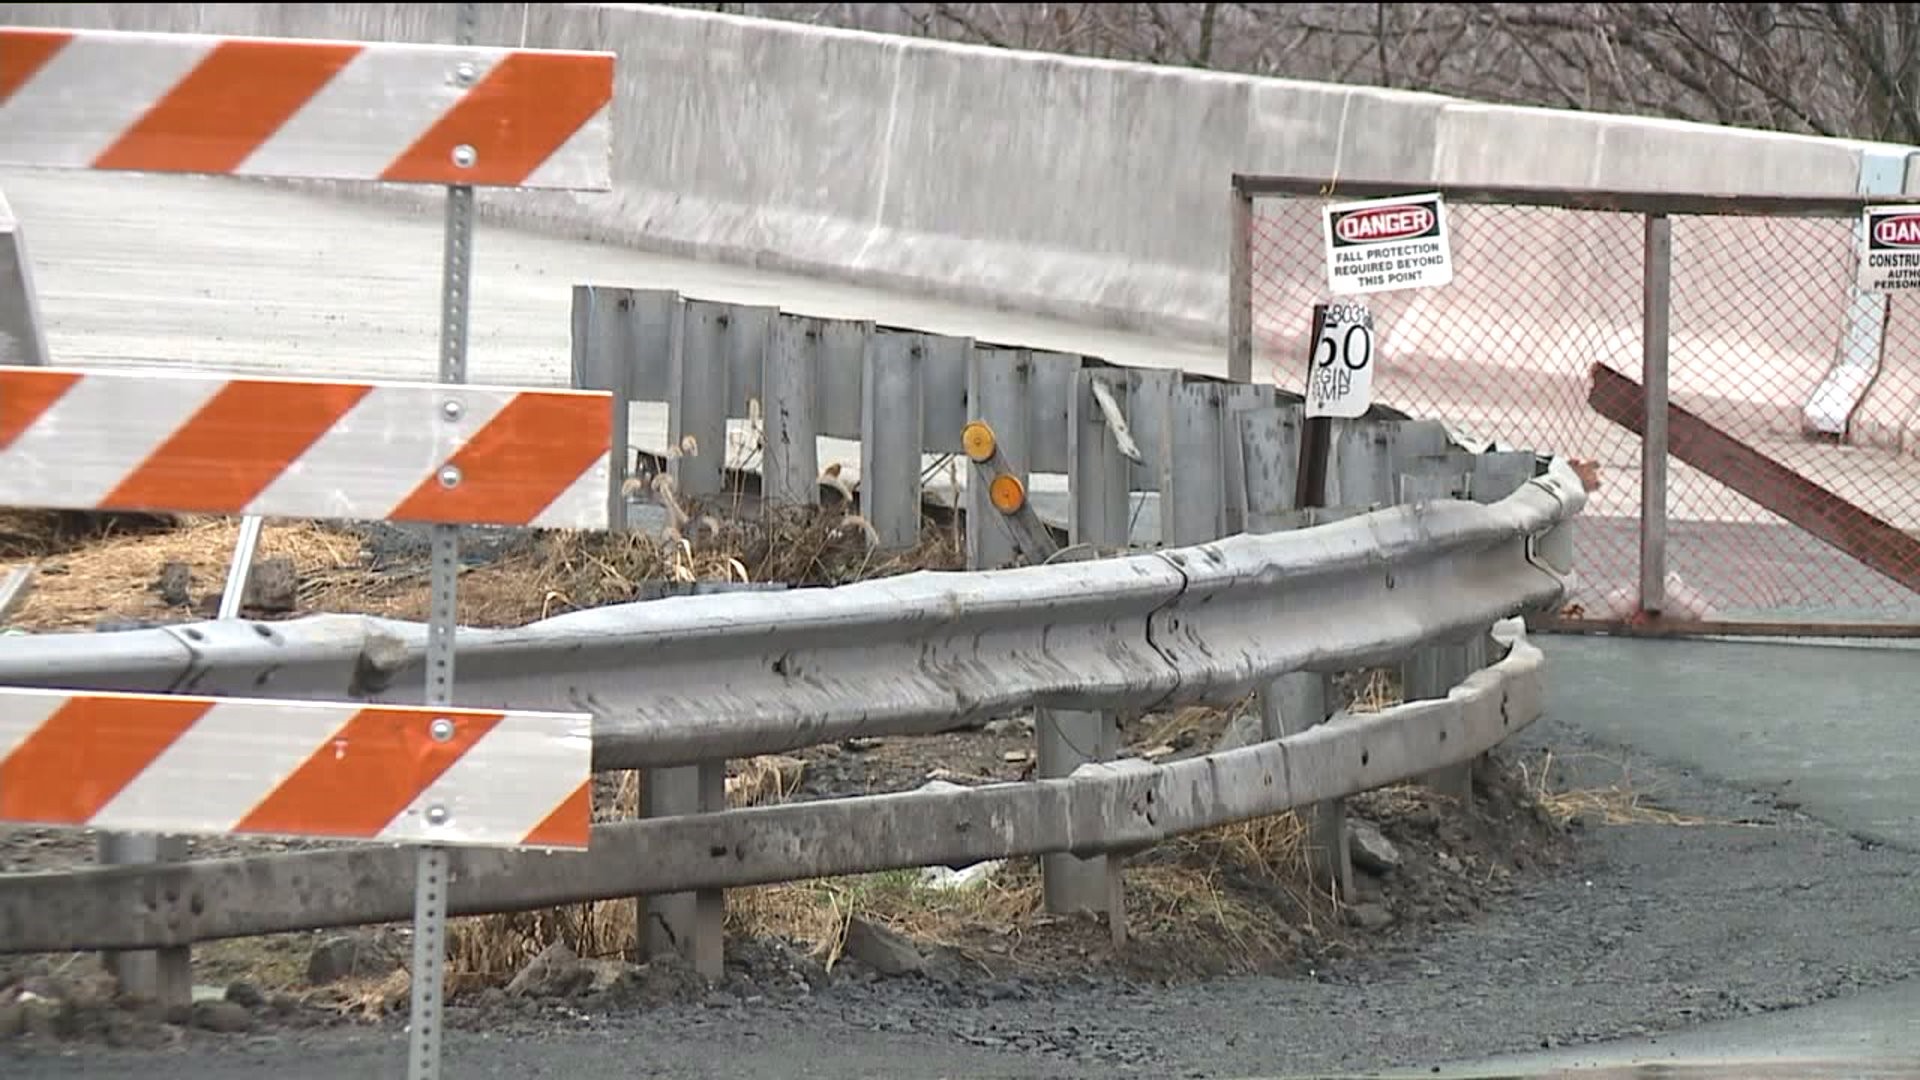 Work on Ramp in Luzerne County Ahead of Schedule